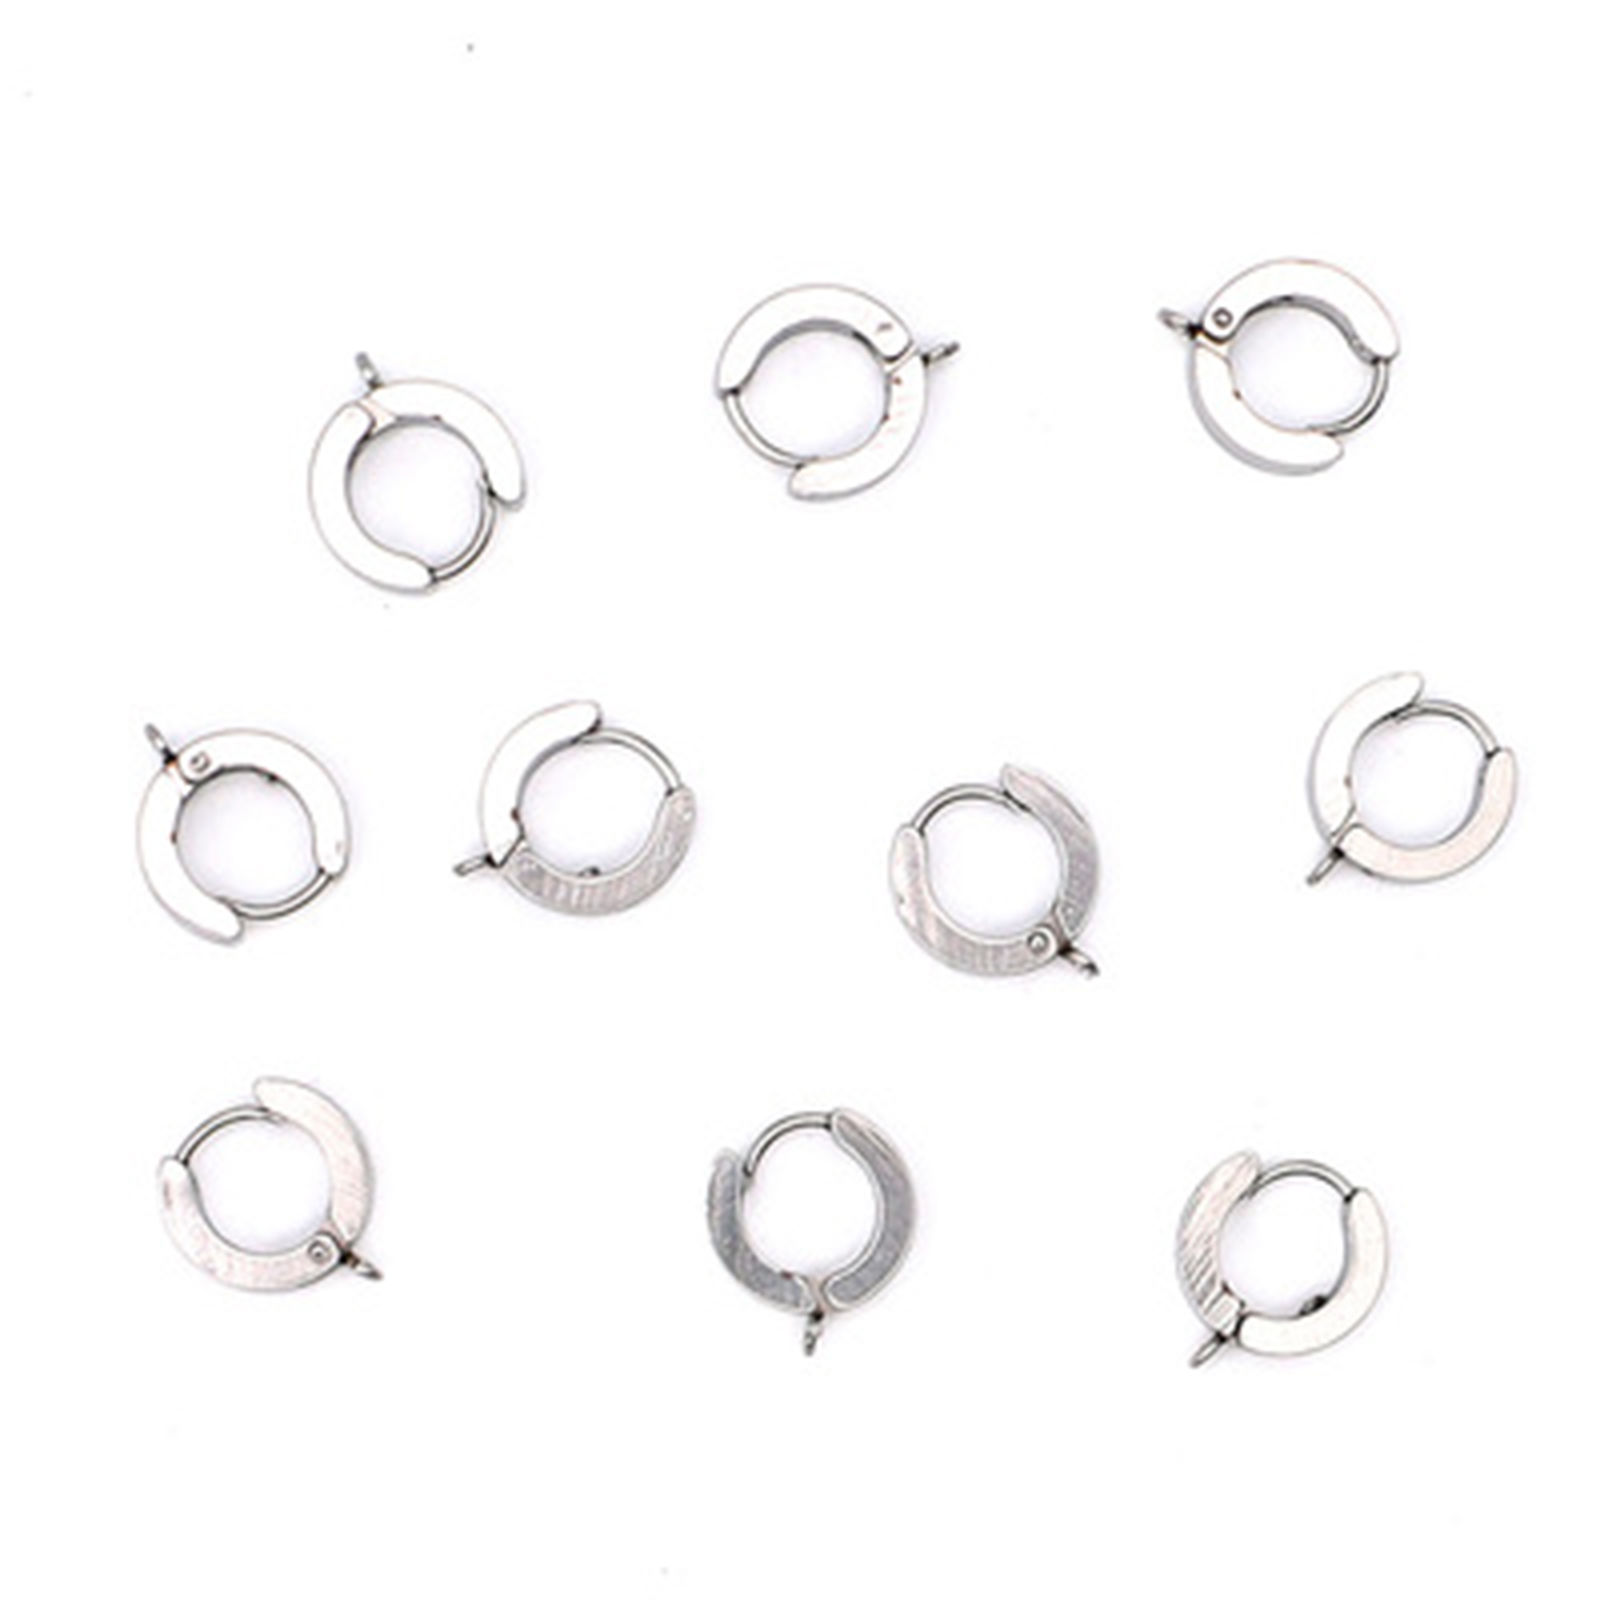 Picture of Stainless Steel Earrings Silver Tone W/ Loop 6 PCs